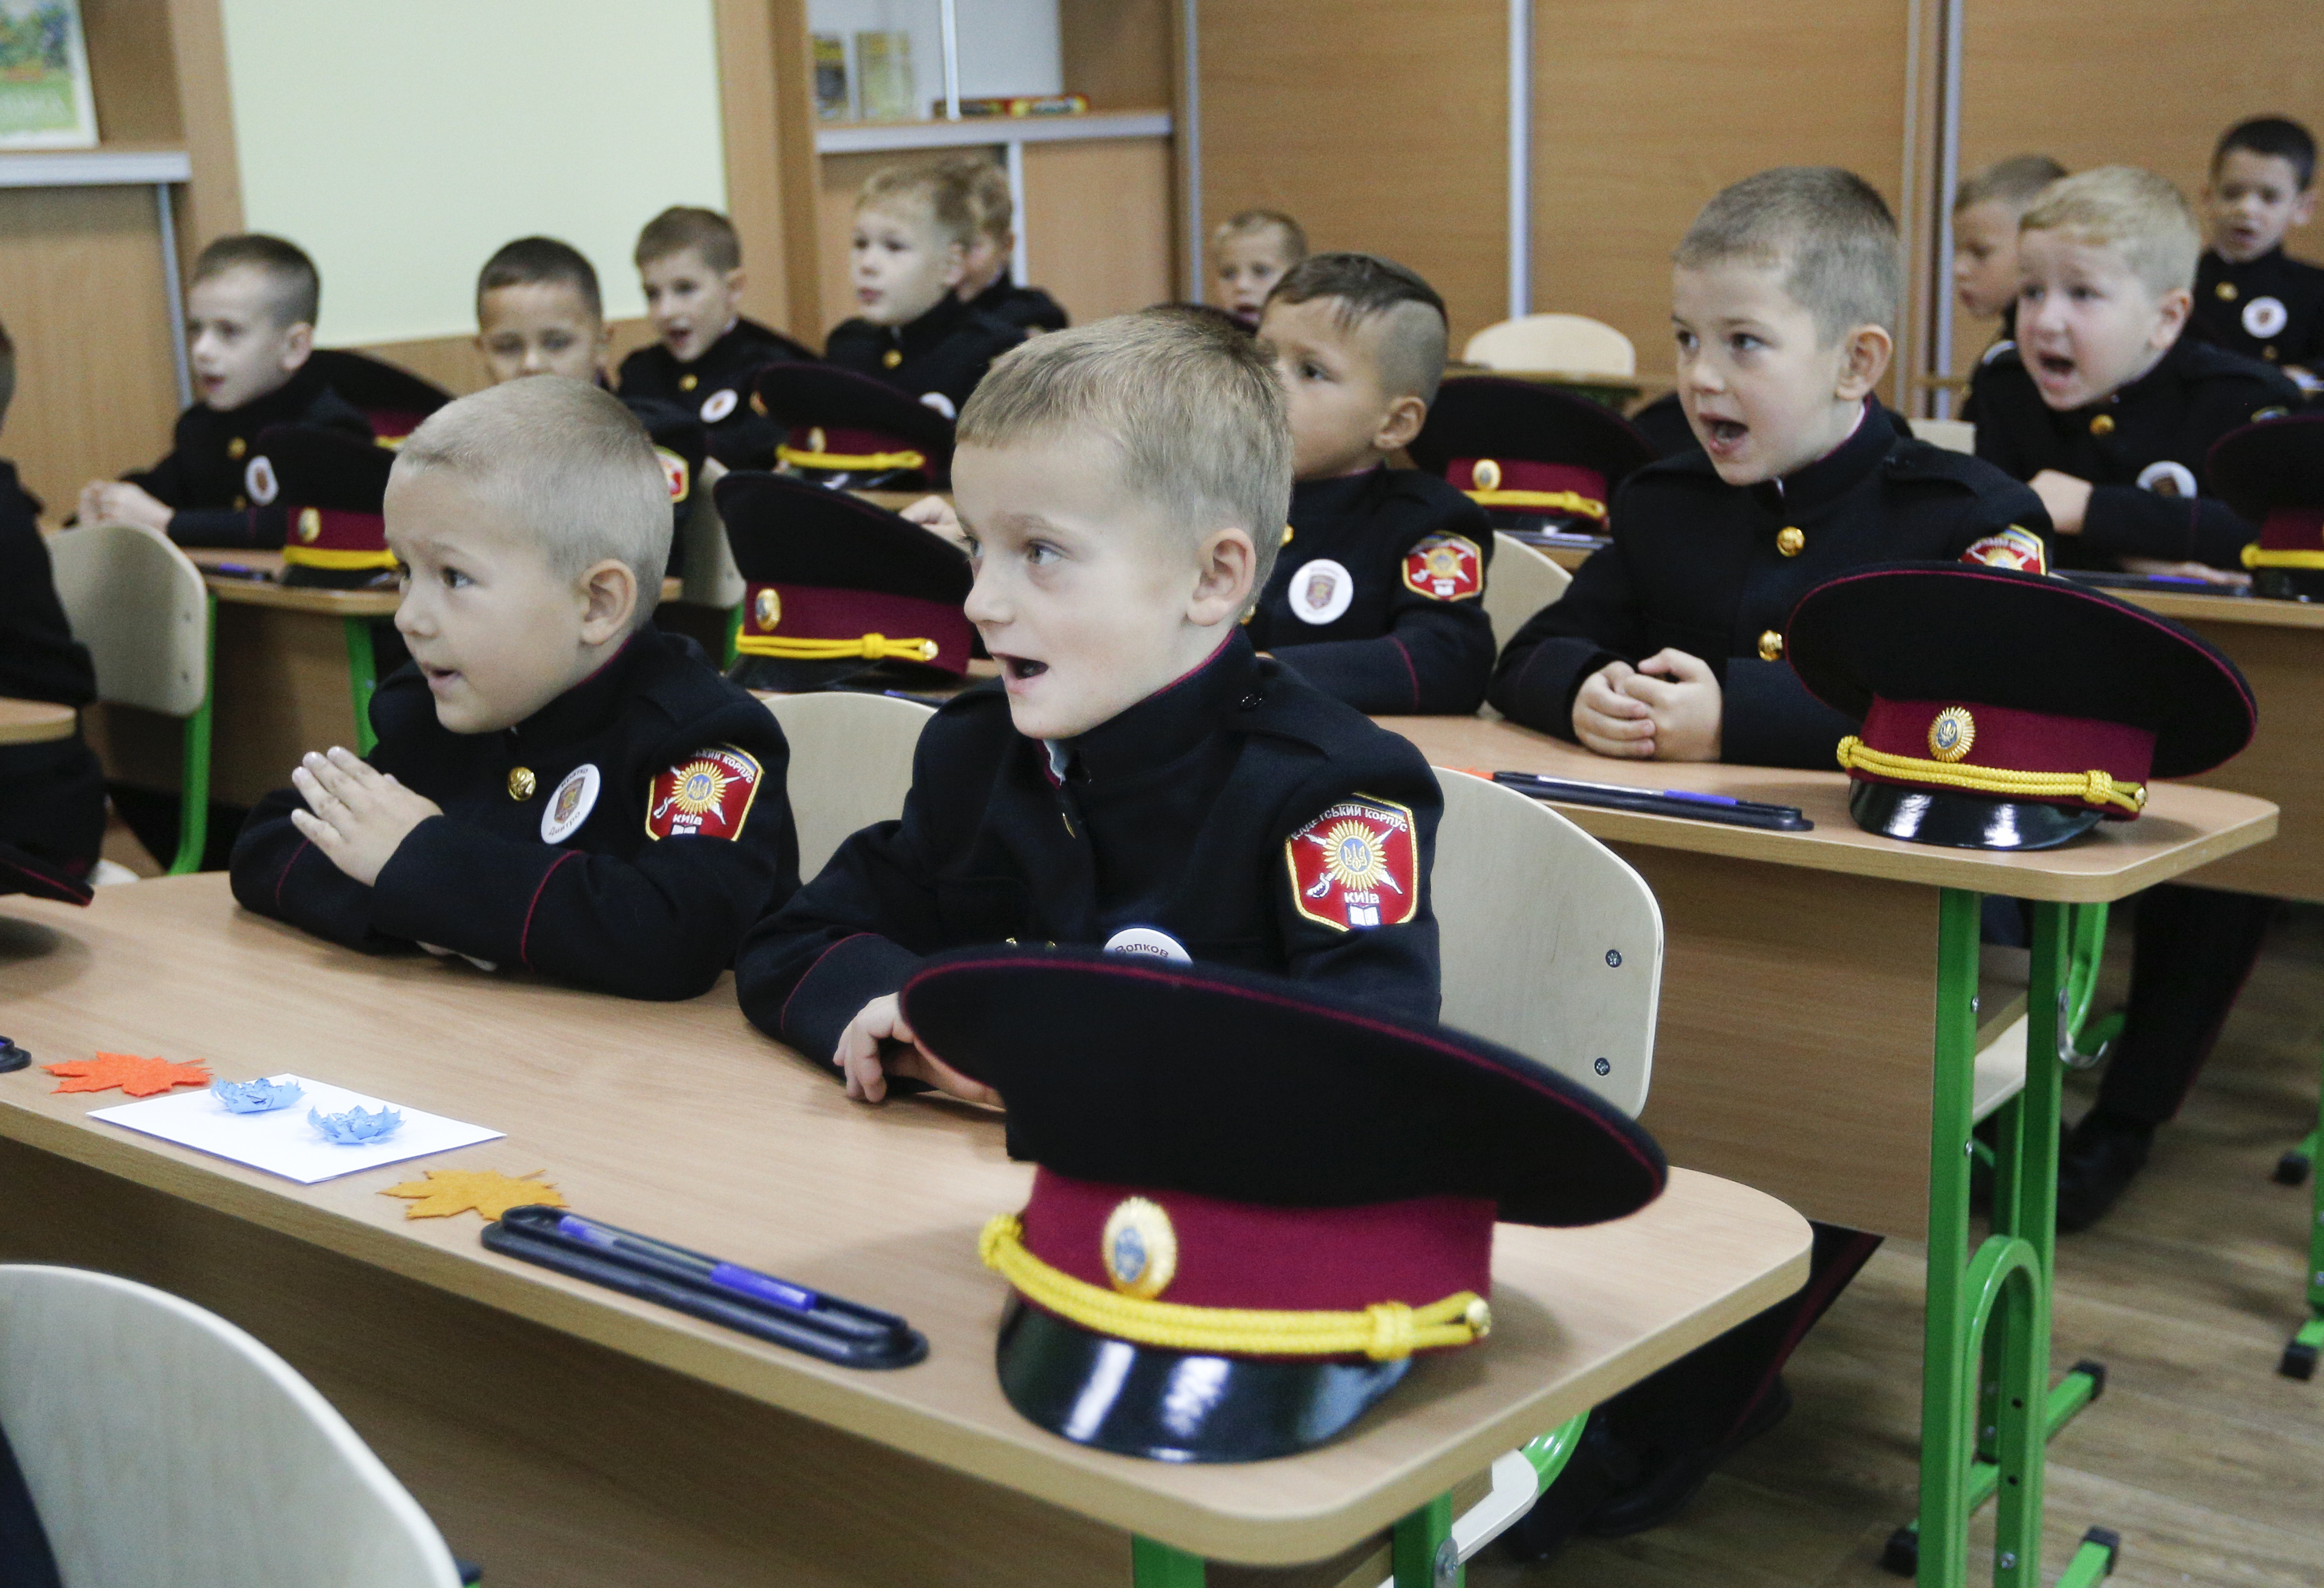 Young cadets listen to teacher at a the first lesson in a cadet lyceum of the first day at school in Kiev, Ukraine, Friday, Sept. 1, 2017. Ukraine marks Sept. 1 as Knowledge Day, as a traditional launch of the academic year. (AP Photo/Efrem Lukatsky)